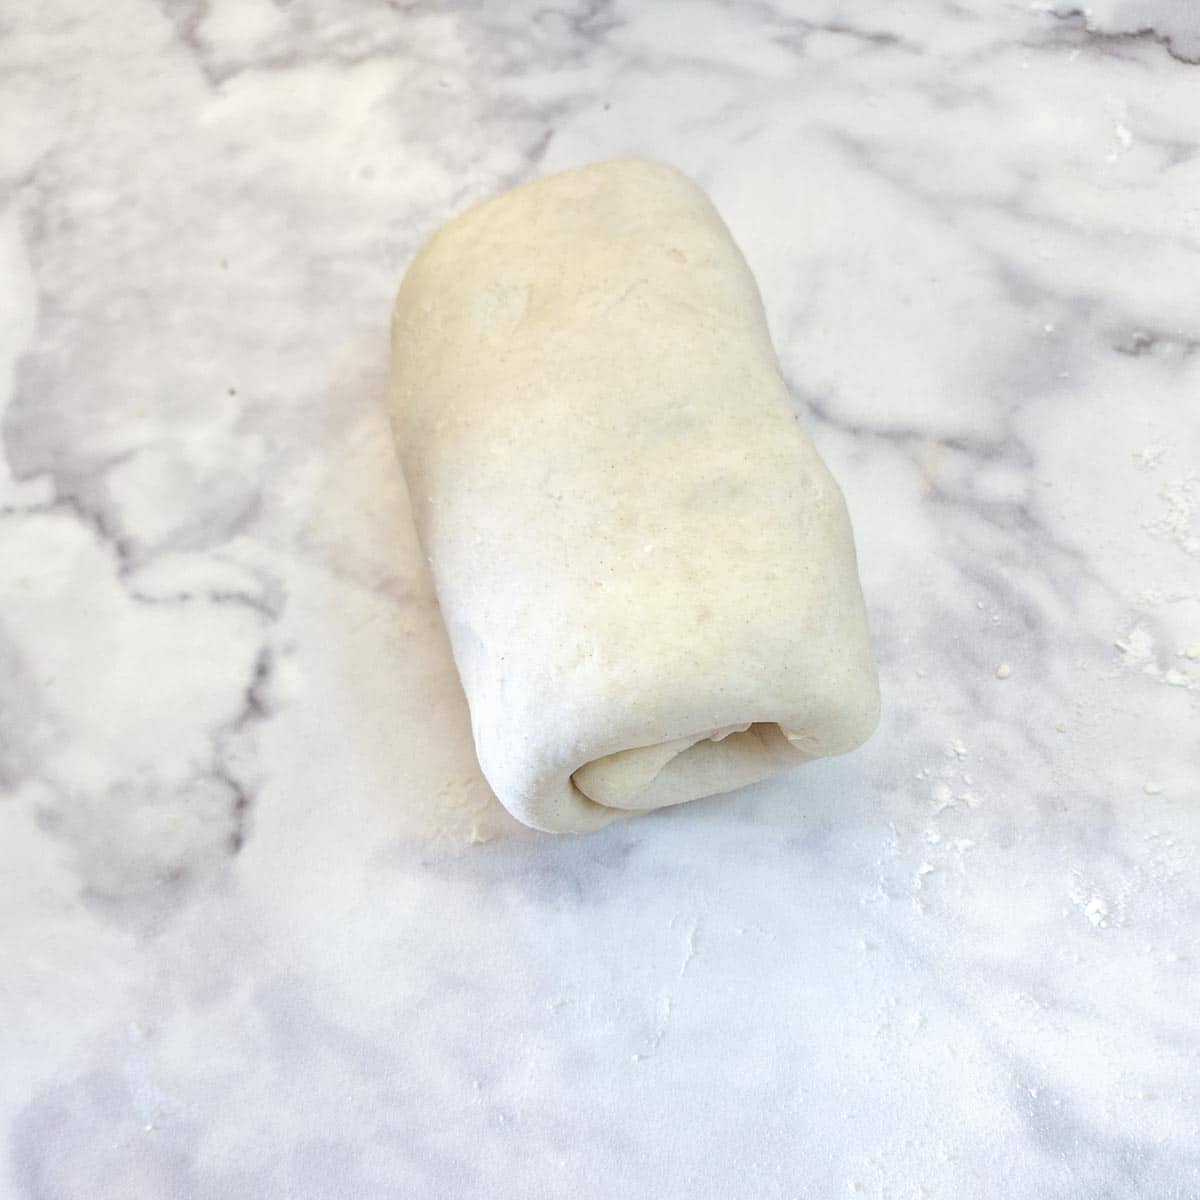 A roll of completed flaky pastry dough.